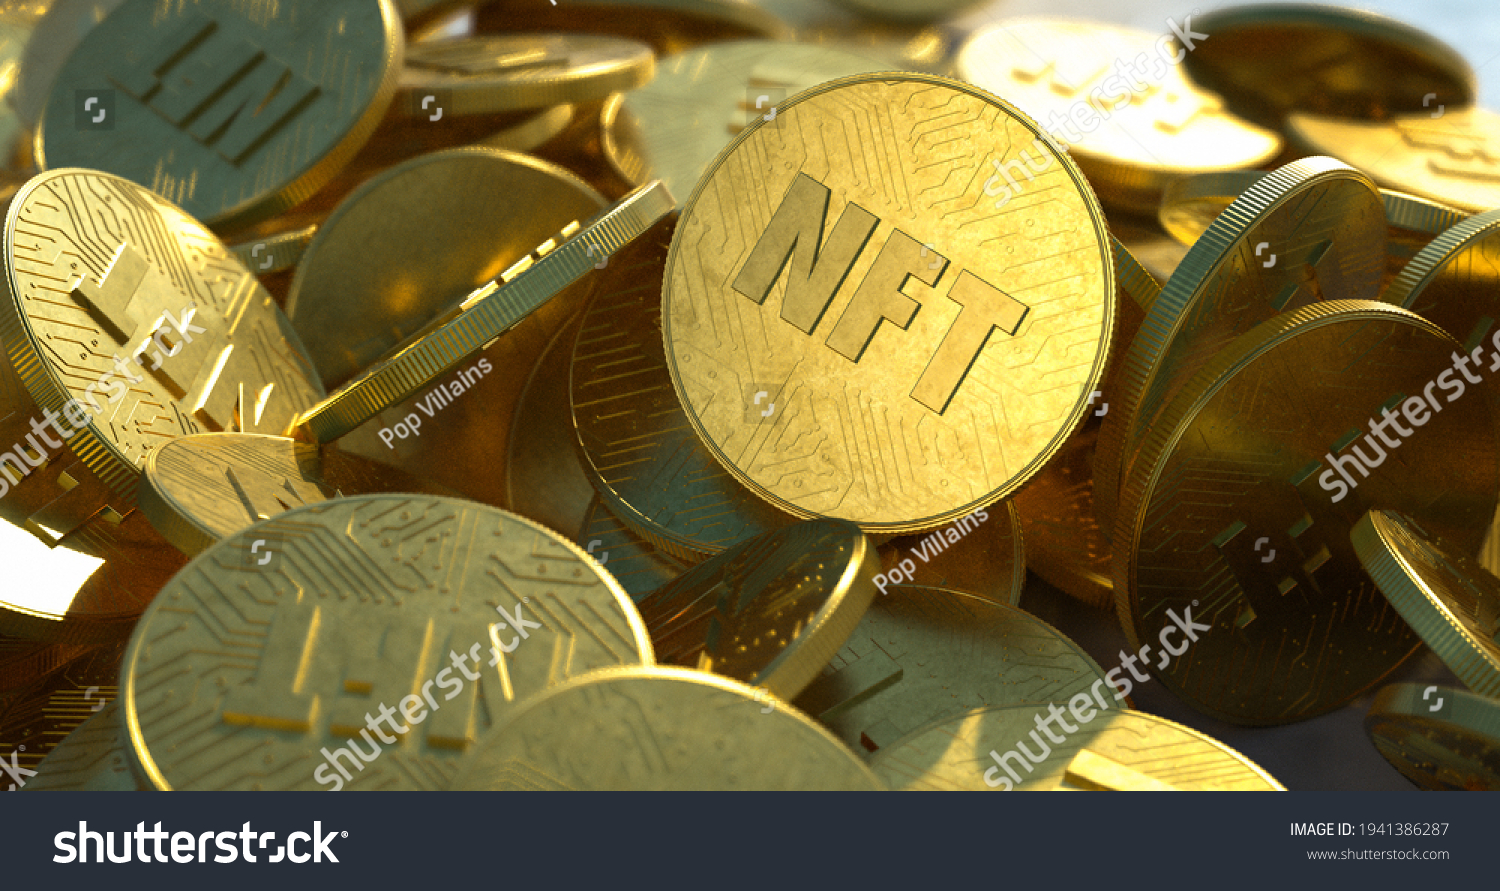 NFT golden coins in pile. Non fungible tokens dropped casually in a large pile, close-up shot. Embossed circuit design, shiny gold color with bright sunlight. Trendy cryptocurrency art coins. #1941386287